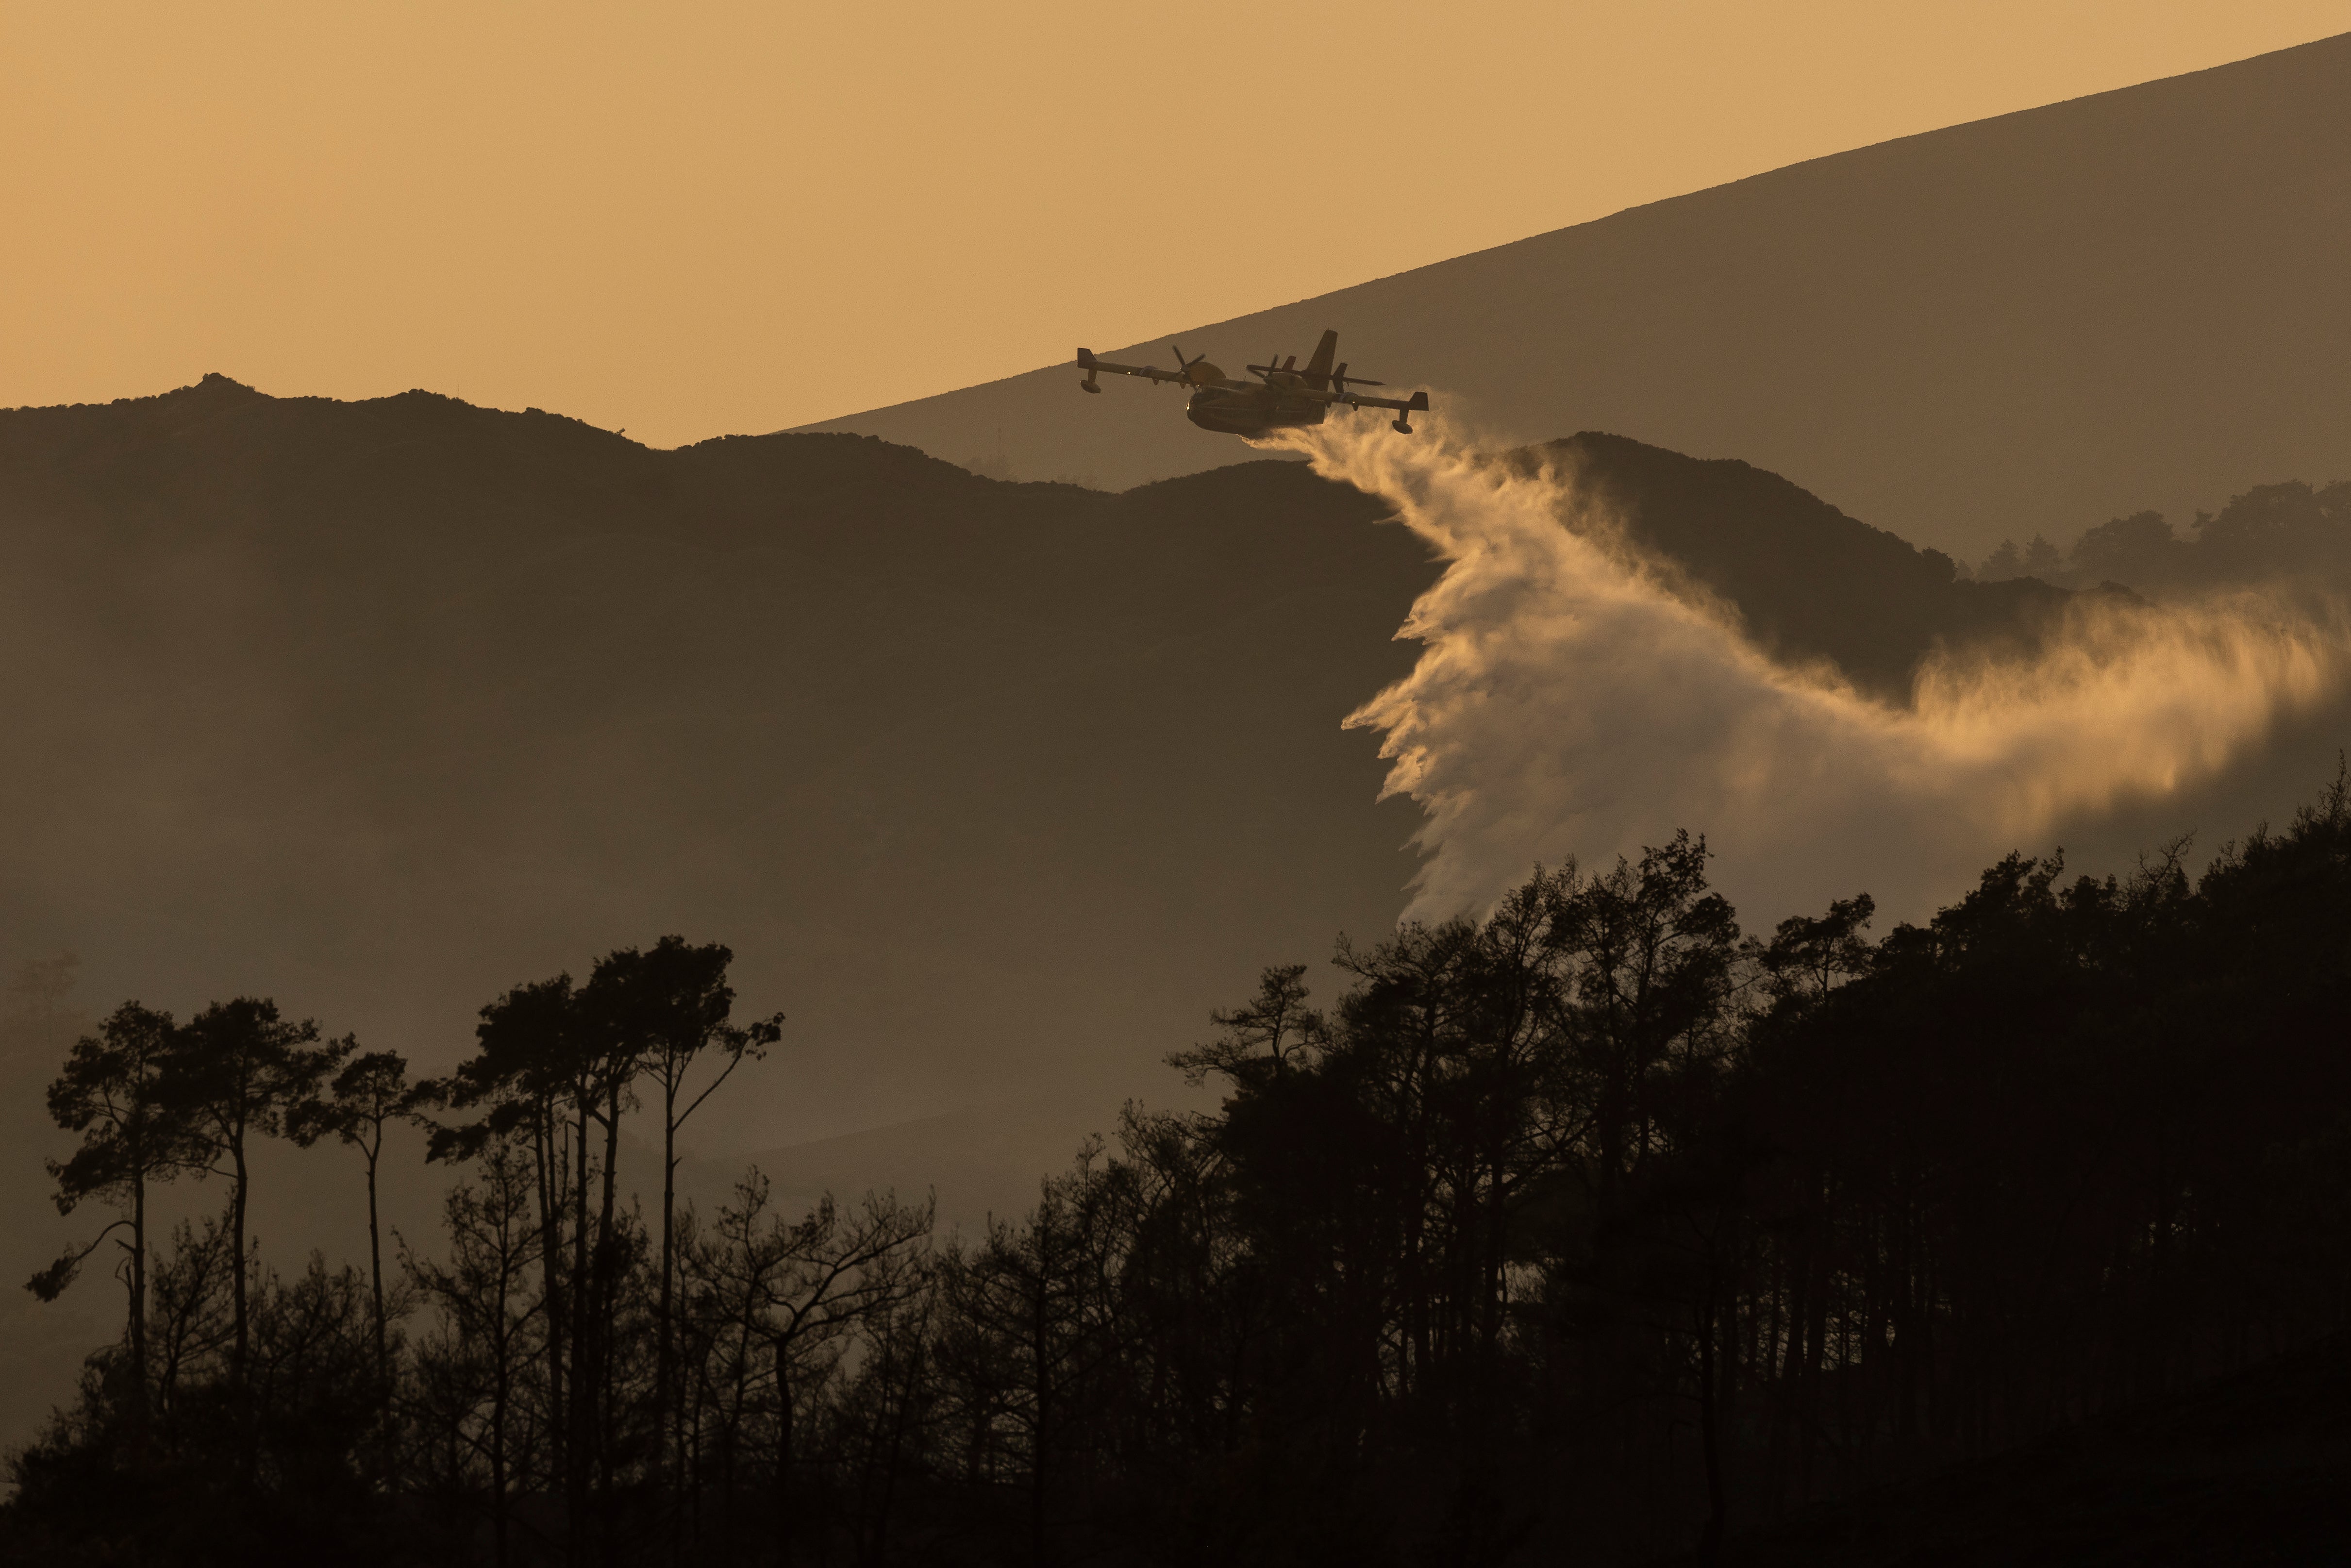 A plane drops water onto flames on a hillside at sunset on July 27, 2023 in Vati, Rhodes